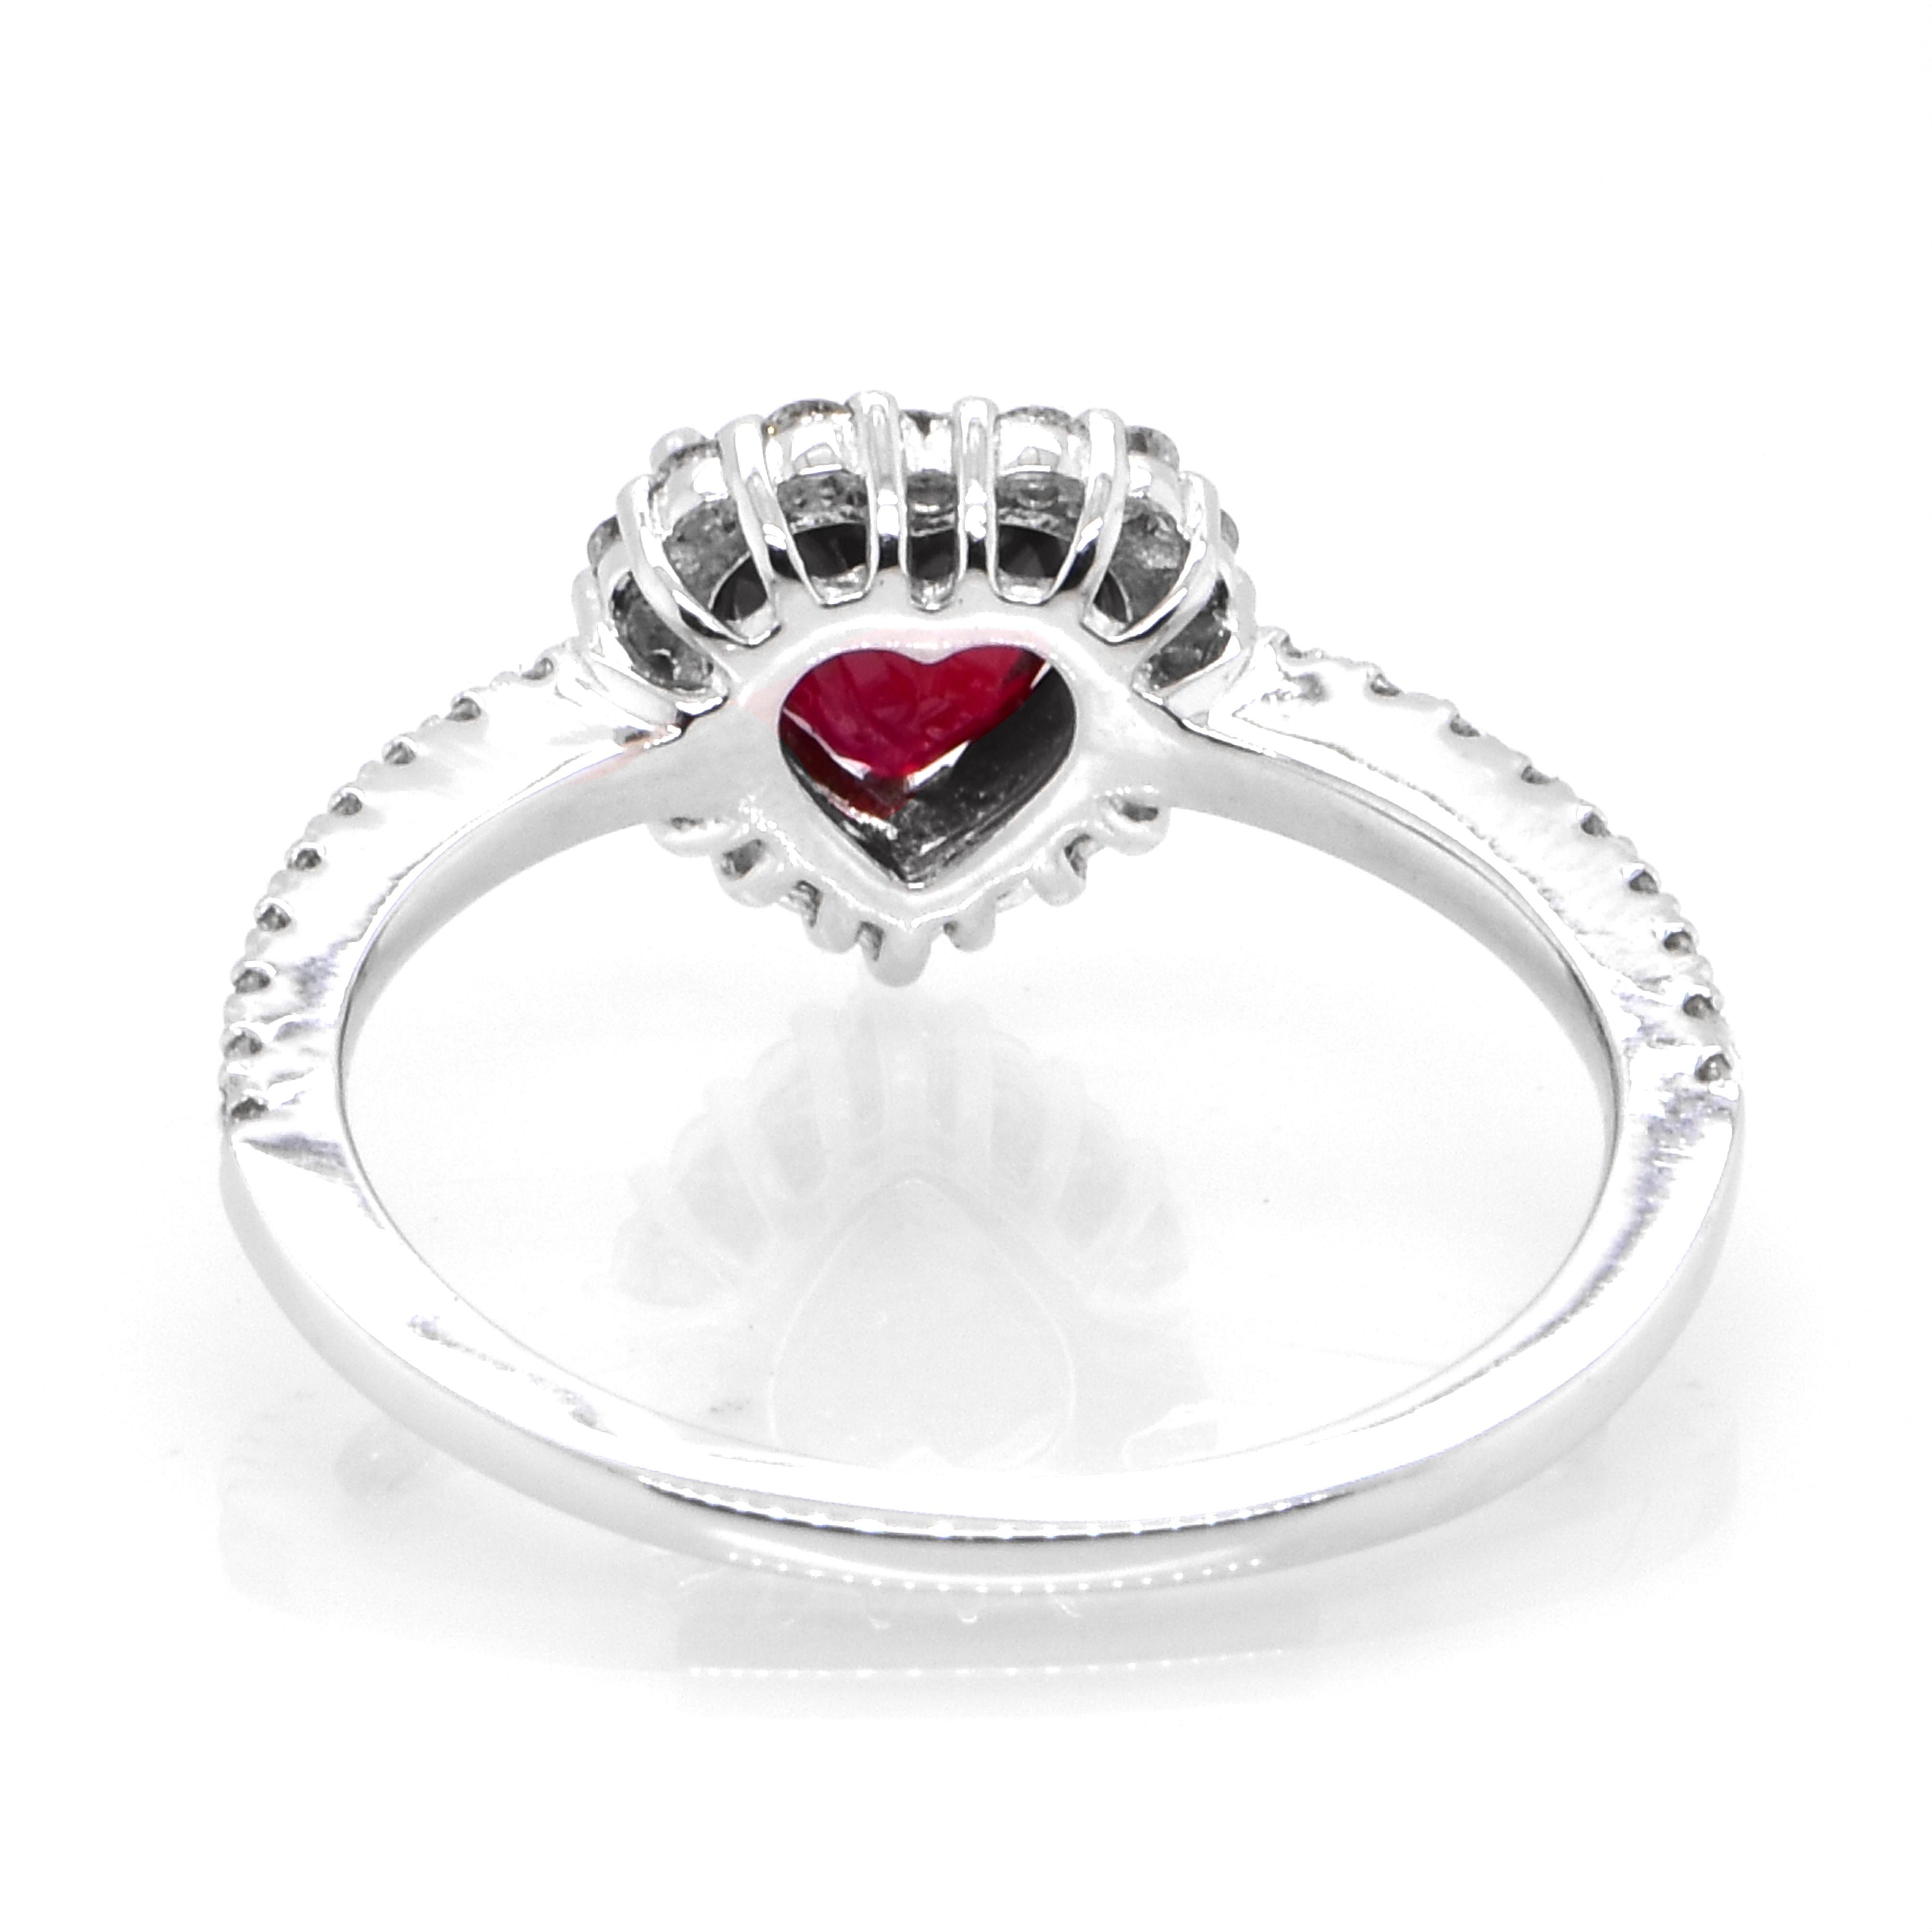 Women's GIA Certified 1.01 Carat, Pigeon Blood Red, Burmese Ruby Ring Made in Platinum For Sale